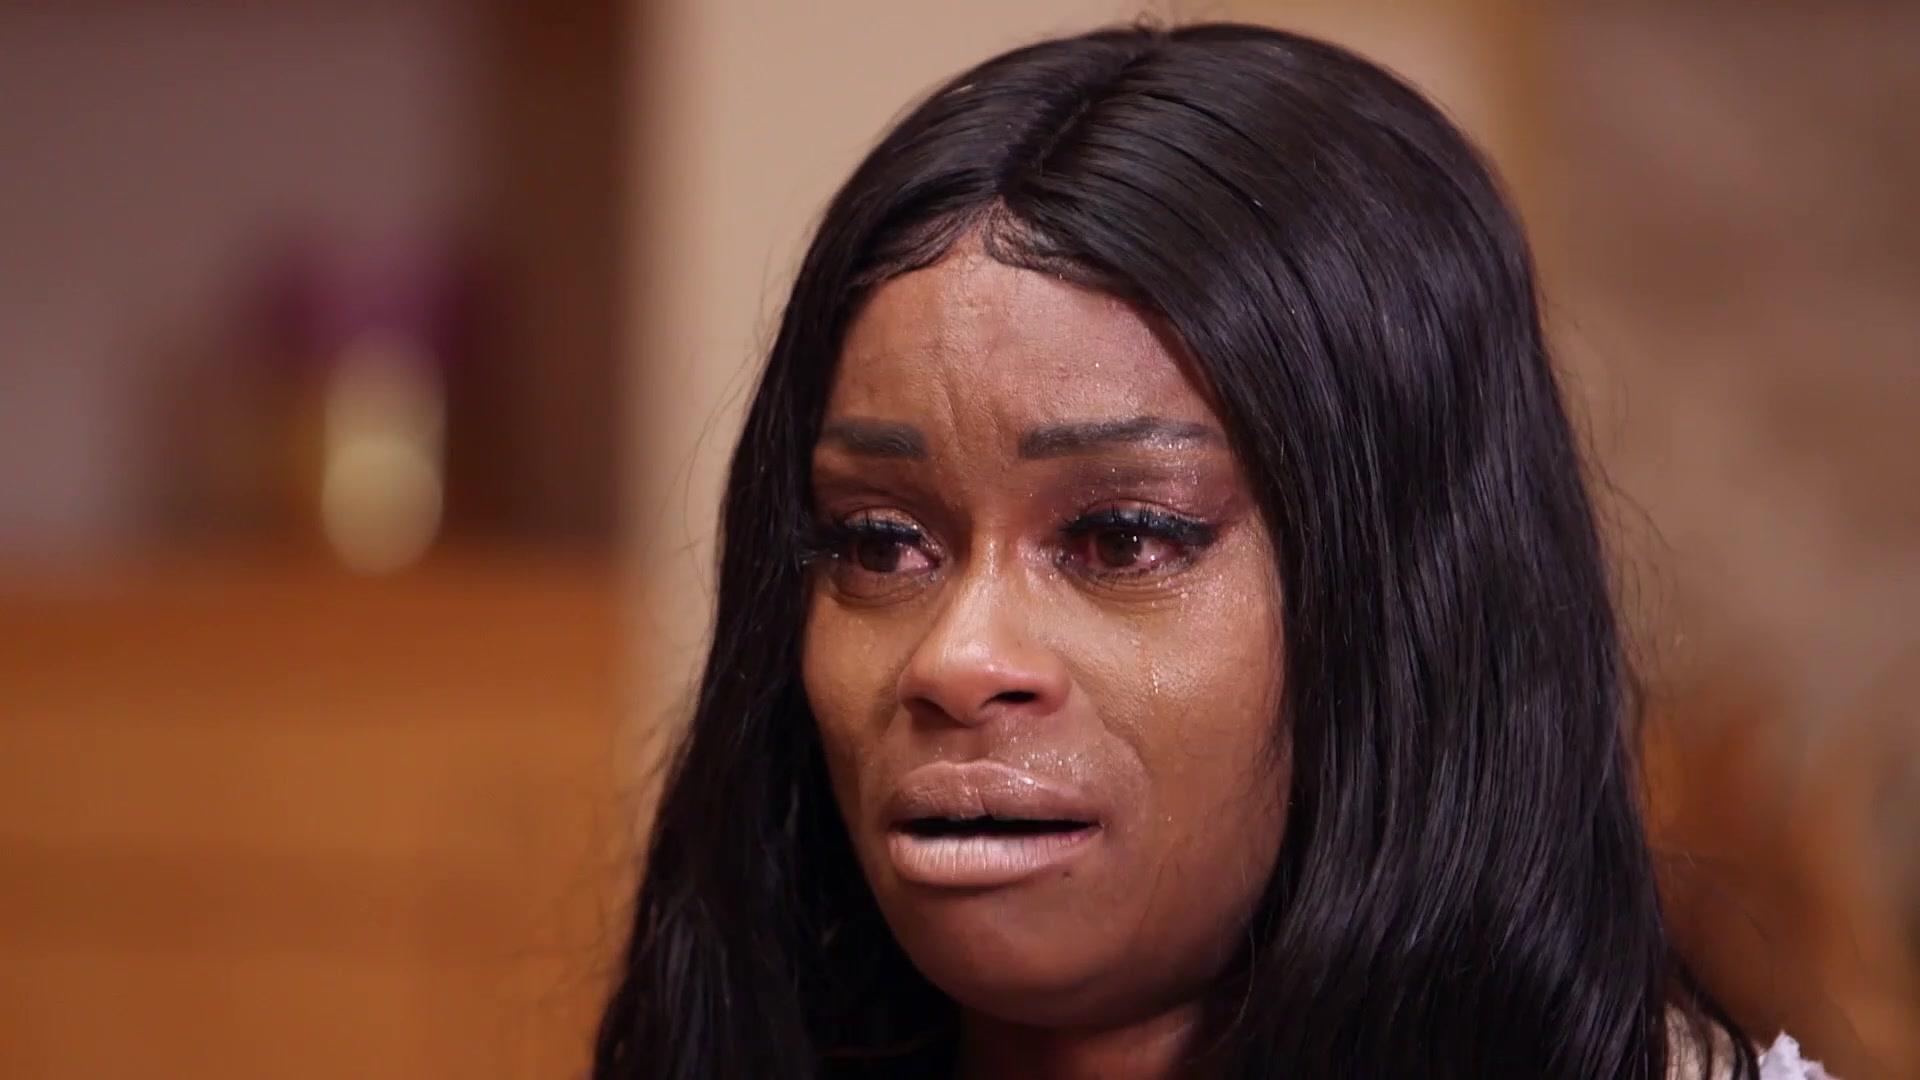 Tokyo Toni Gets Emotional About Her Mother